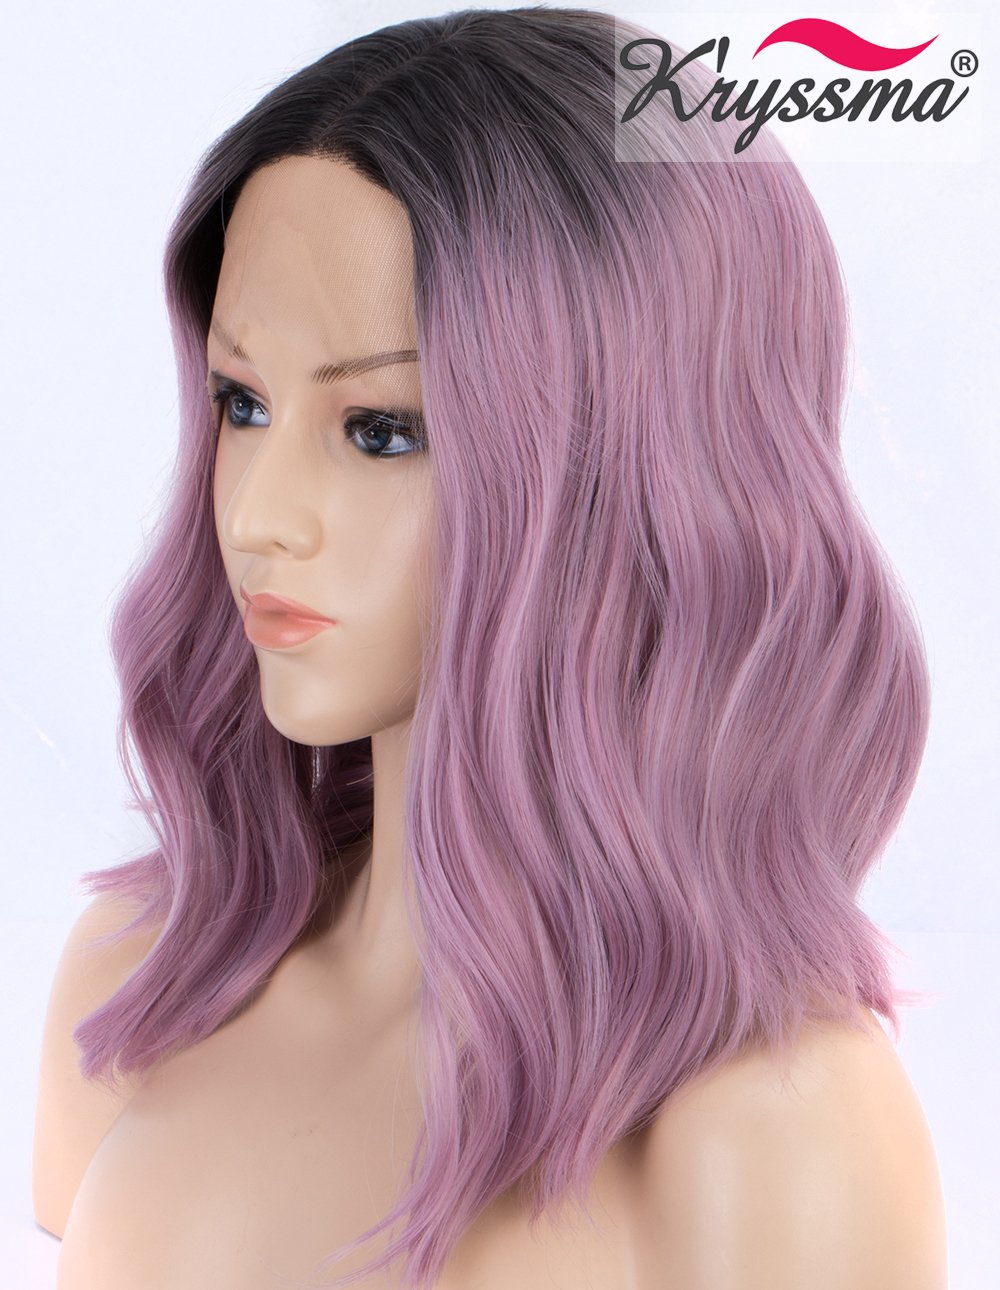 Kryssma Short Bob Lace Front Wig Ombre Purple Synthetic Wig For Women Dark Roots To Ash Purple